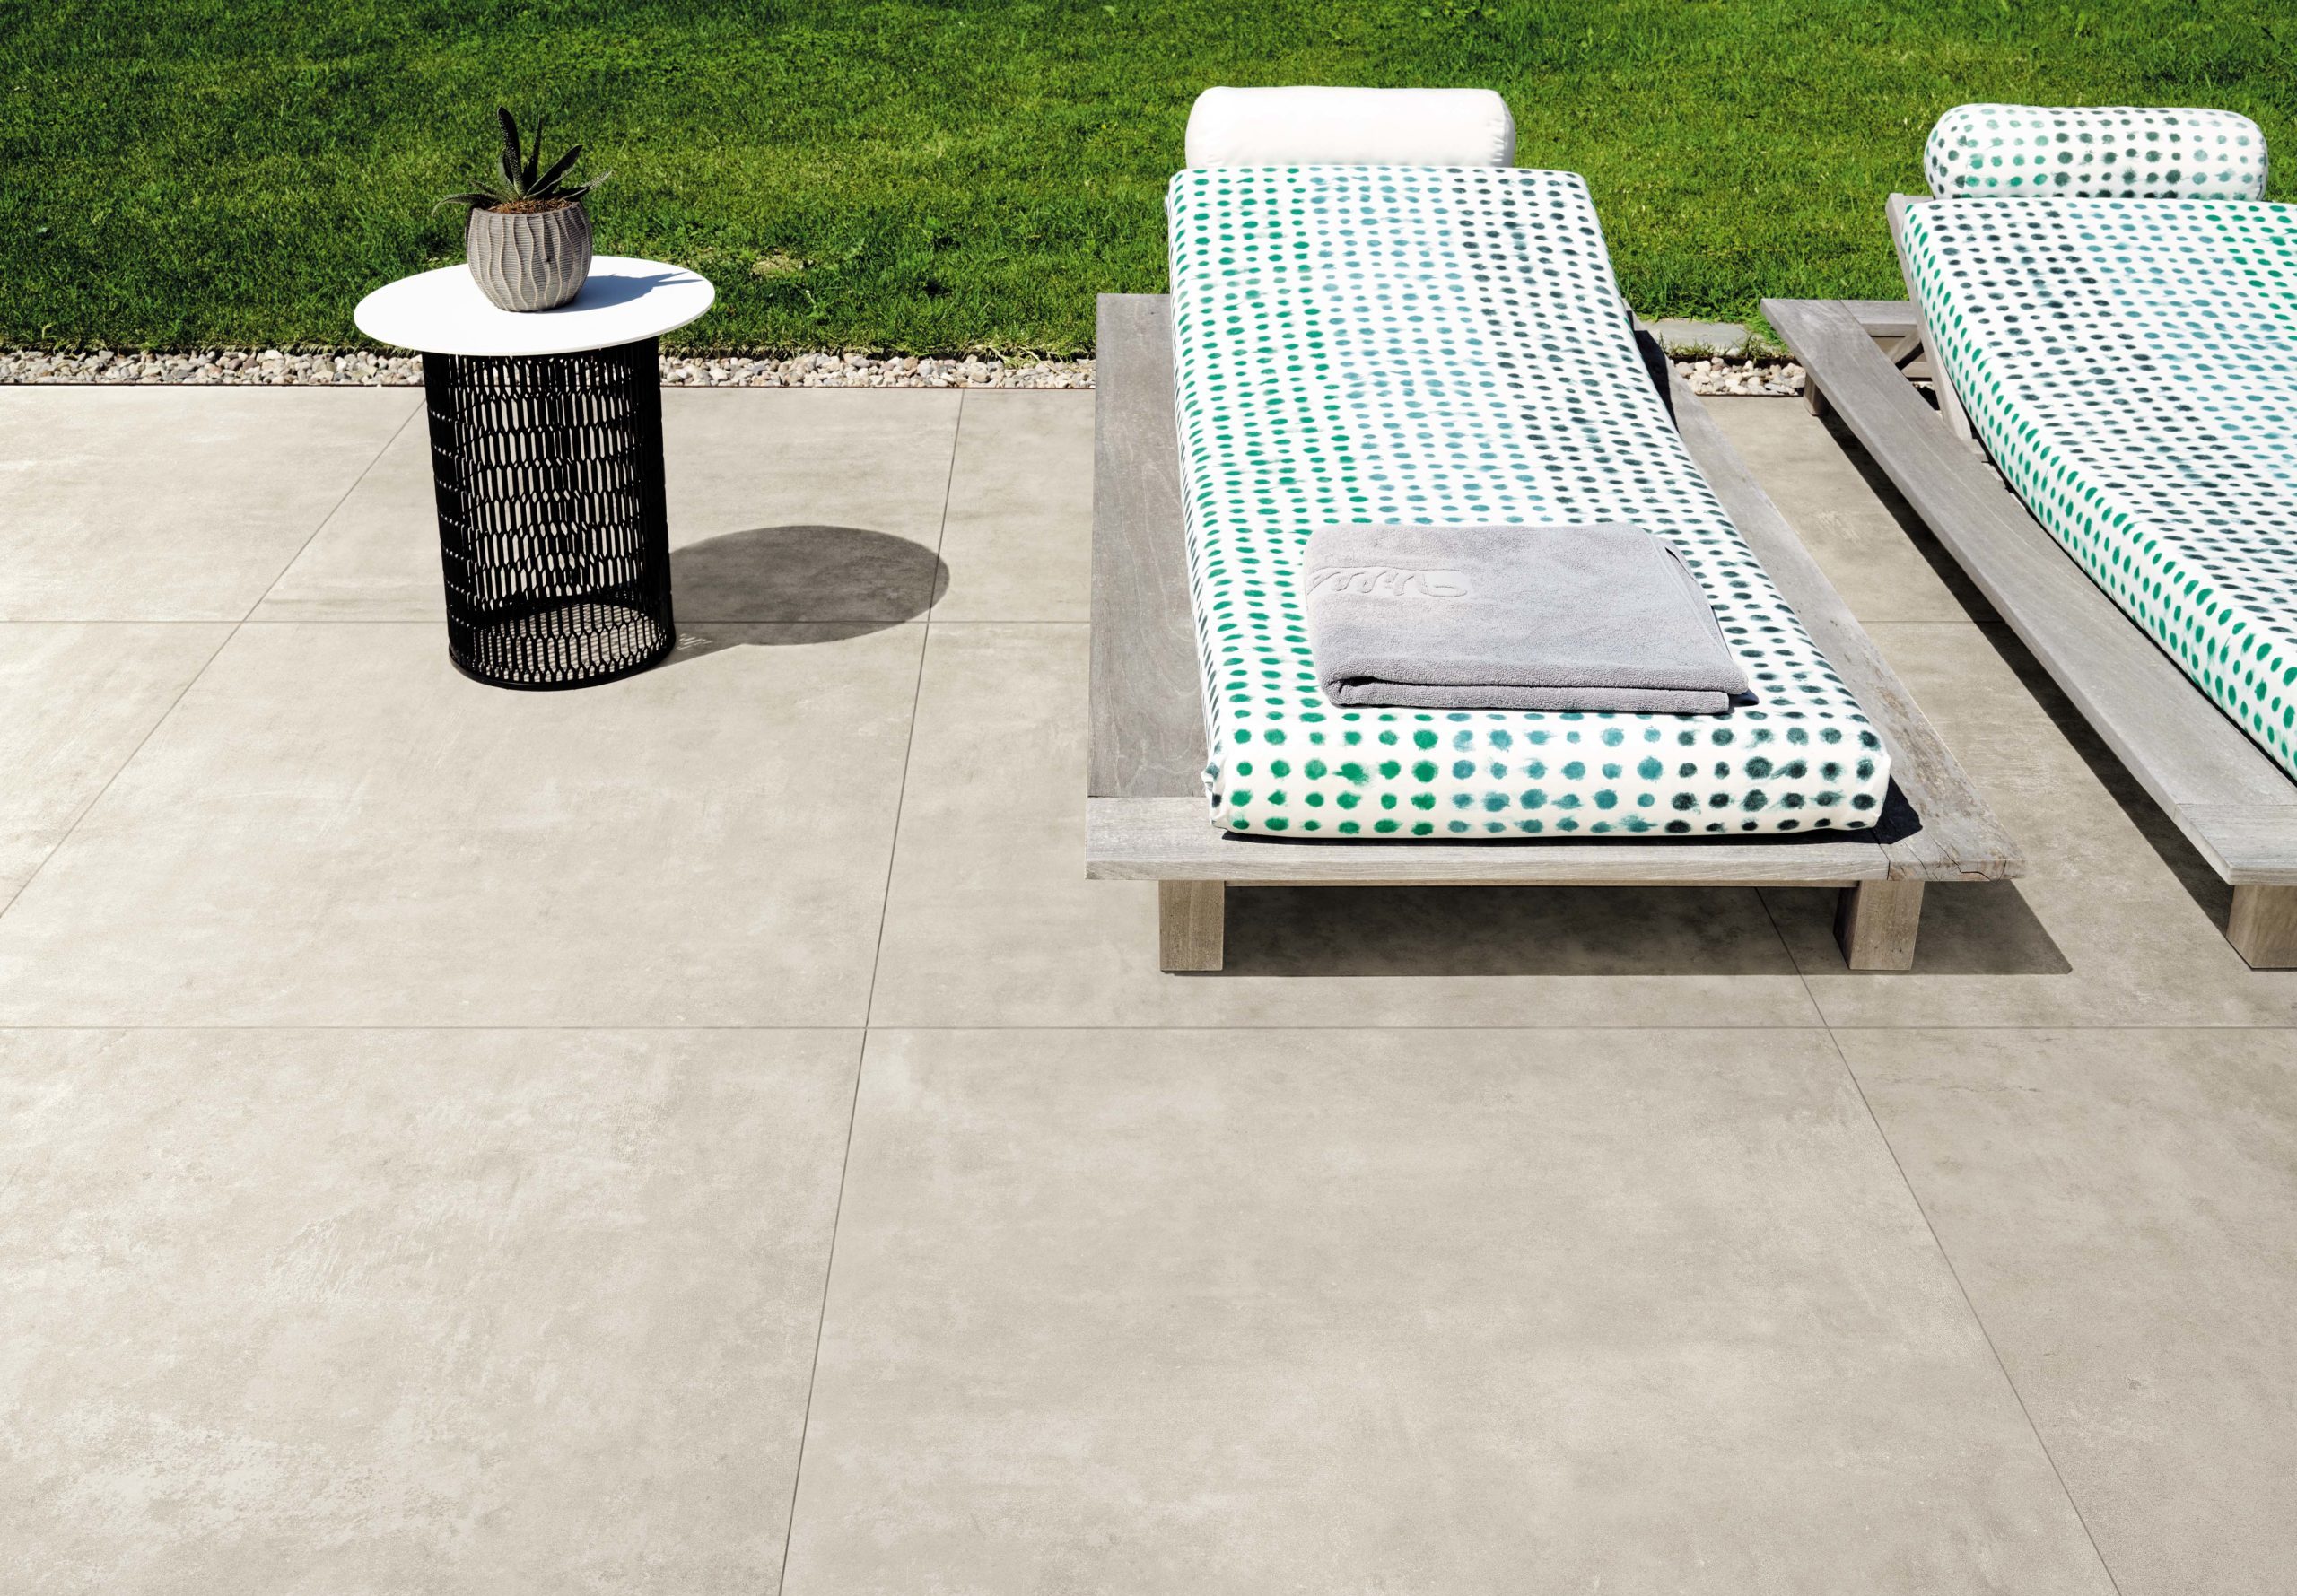 Boost porcelain tile in white installed on the floor in an outdoor area.